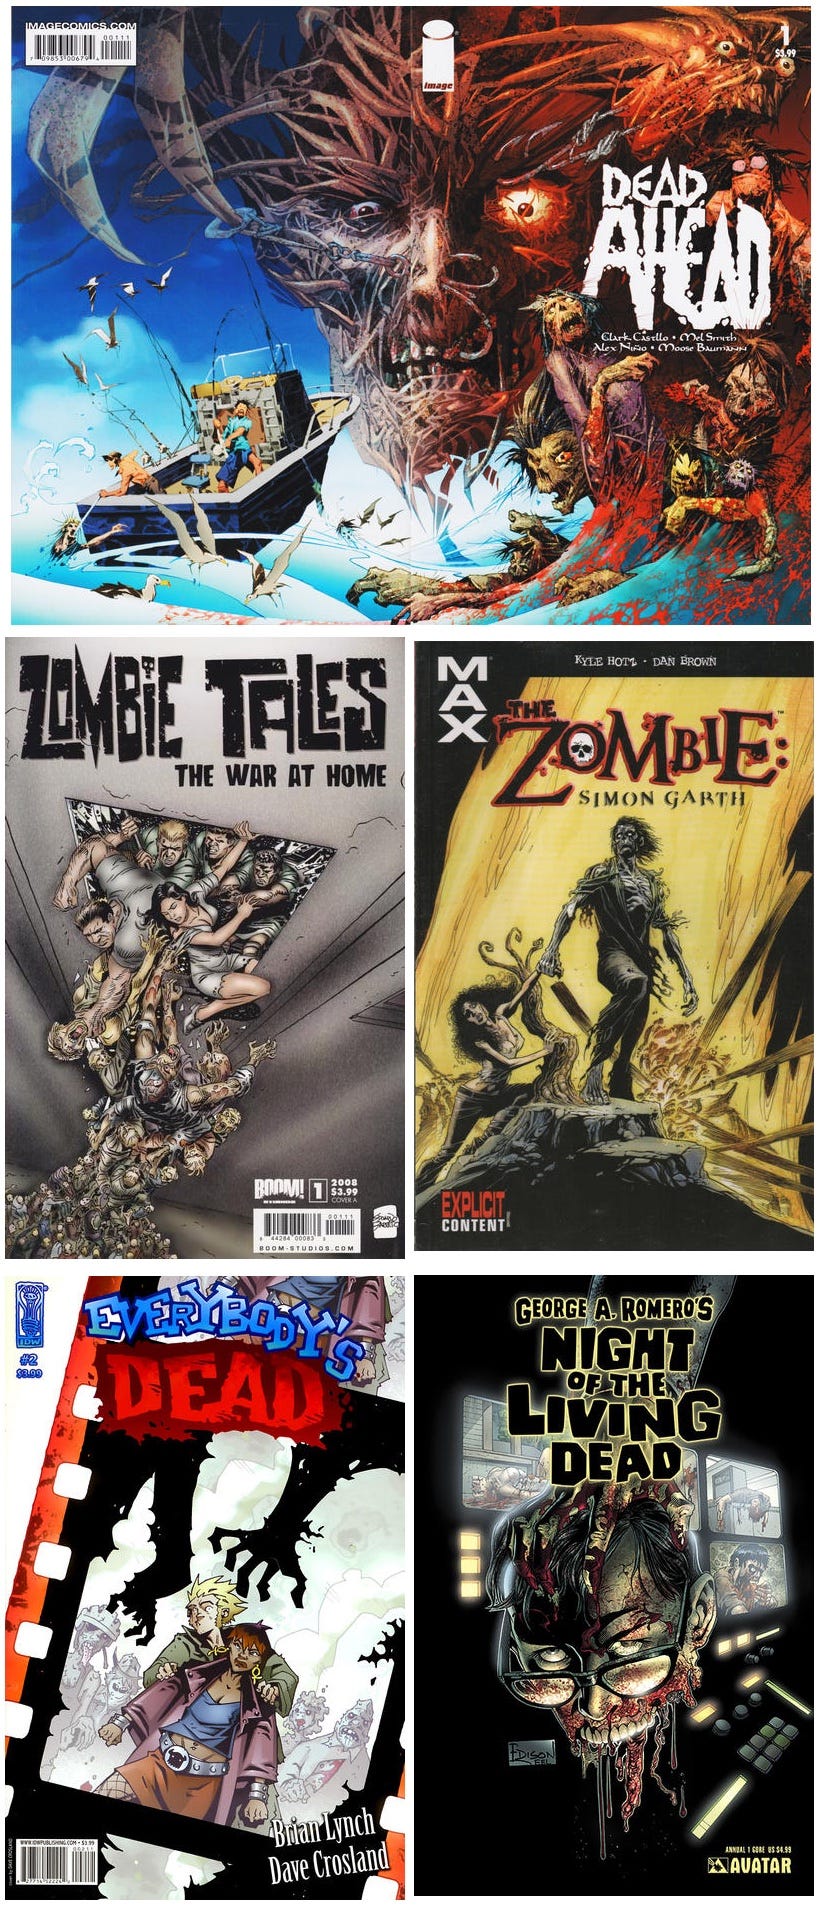 Zombie comics books published in 2008